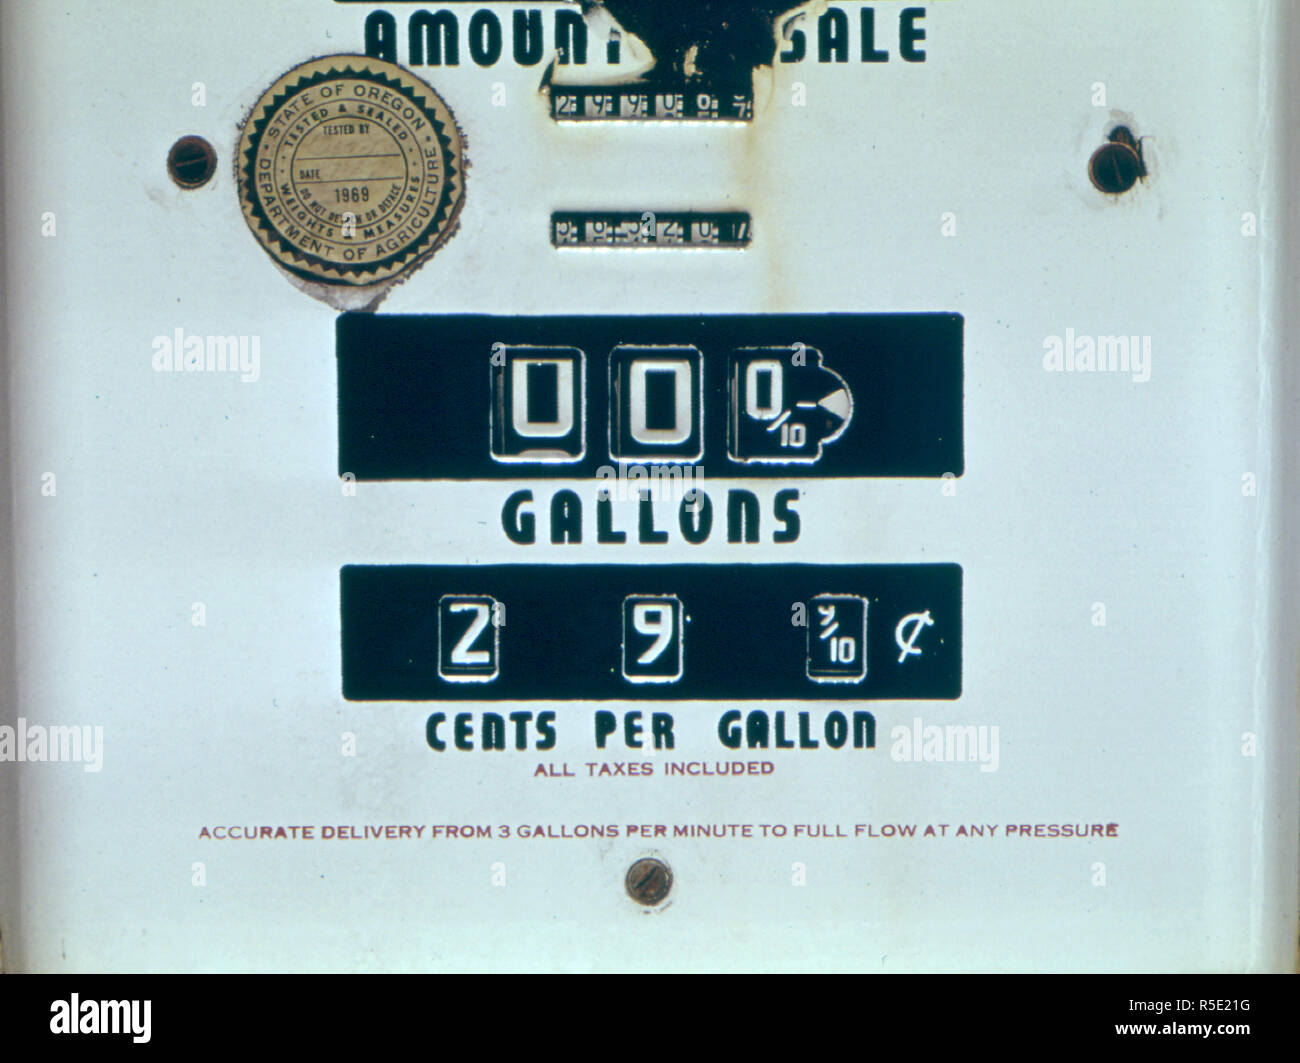 Sign of the Past Is This Abandoned Gasoline Pump with a Price of 29.9 Cents Per Gallon. The Cost of Fuel Has Made Such a Reoccurrence Nothing But a Dream. The Gas Pump Was Photographed at 04/1974 Stock Photo